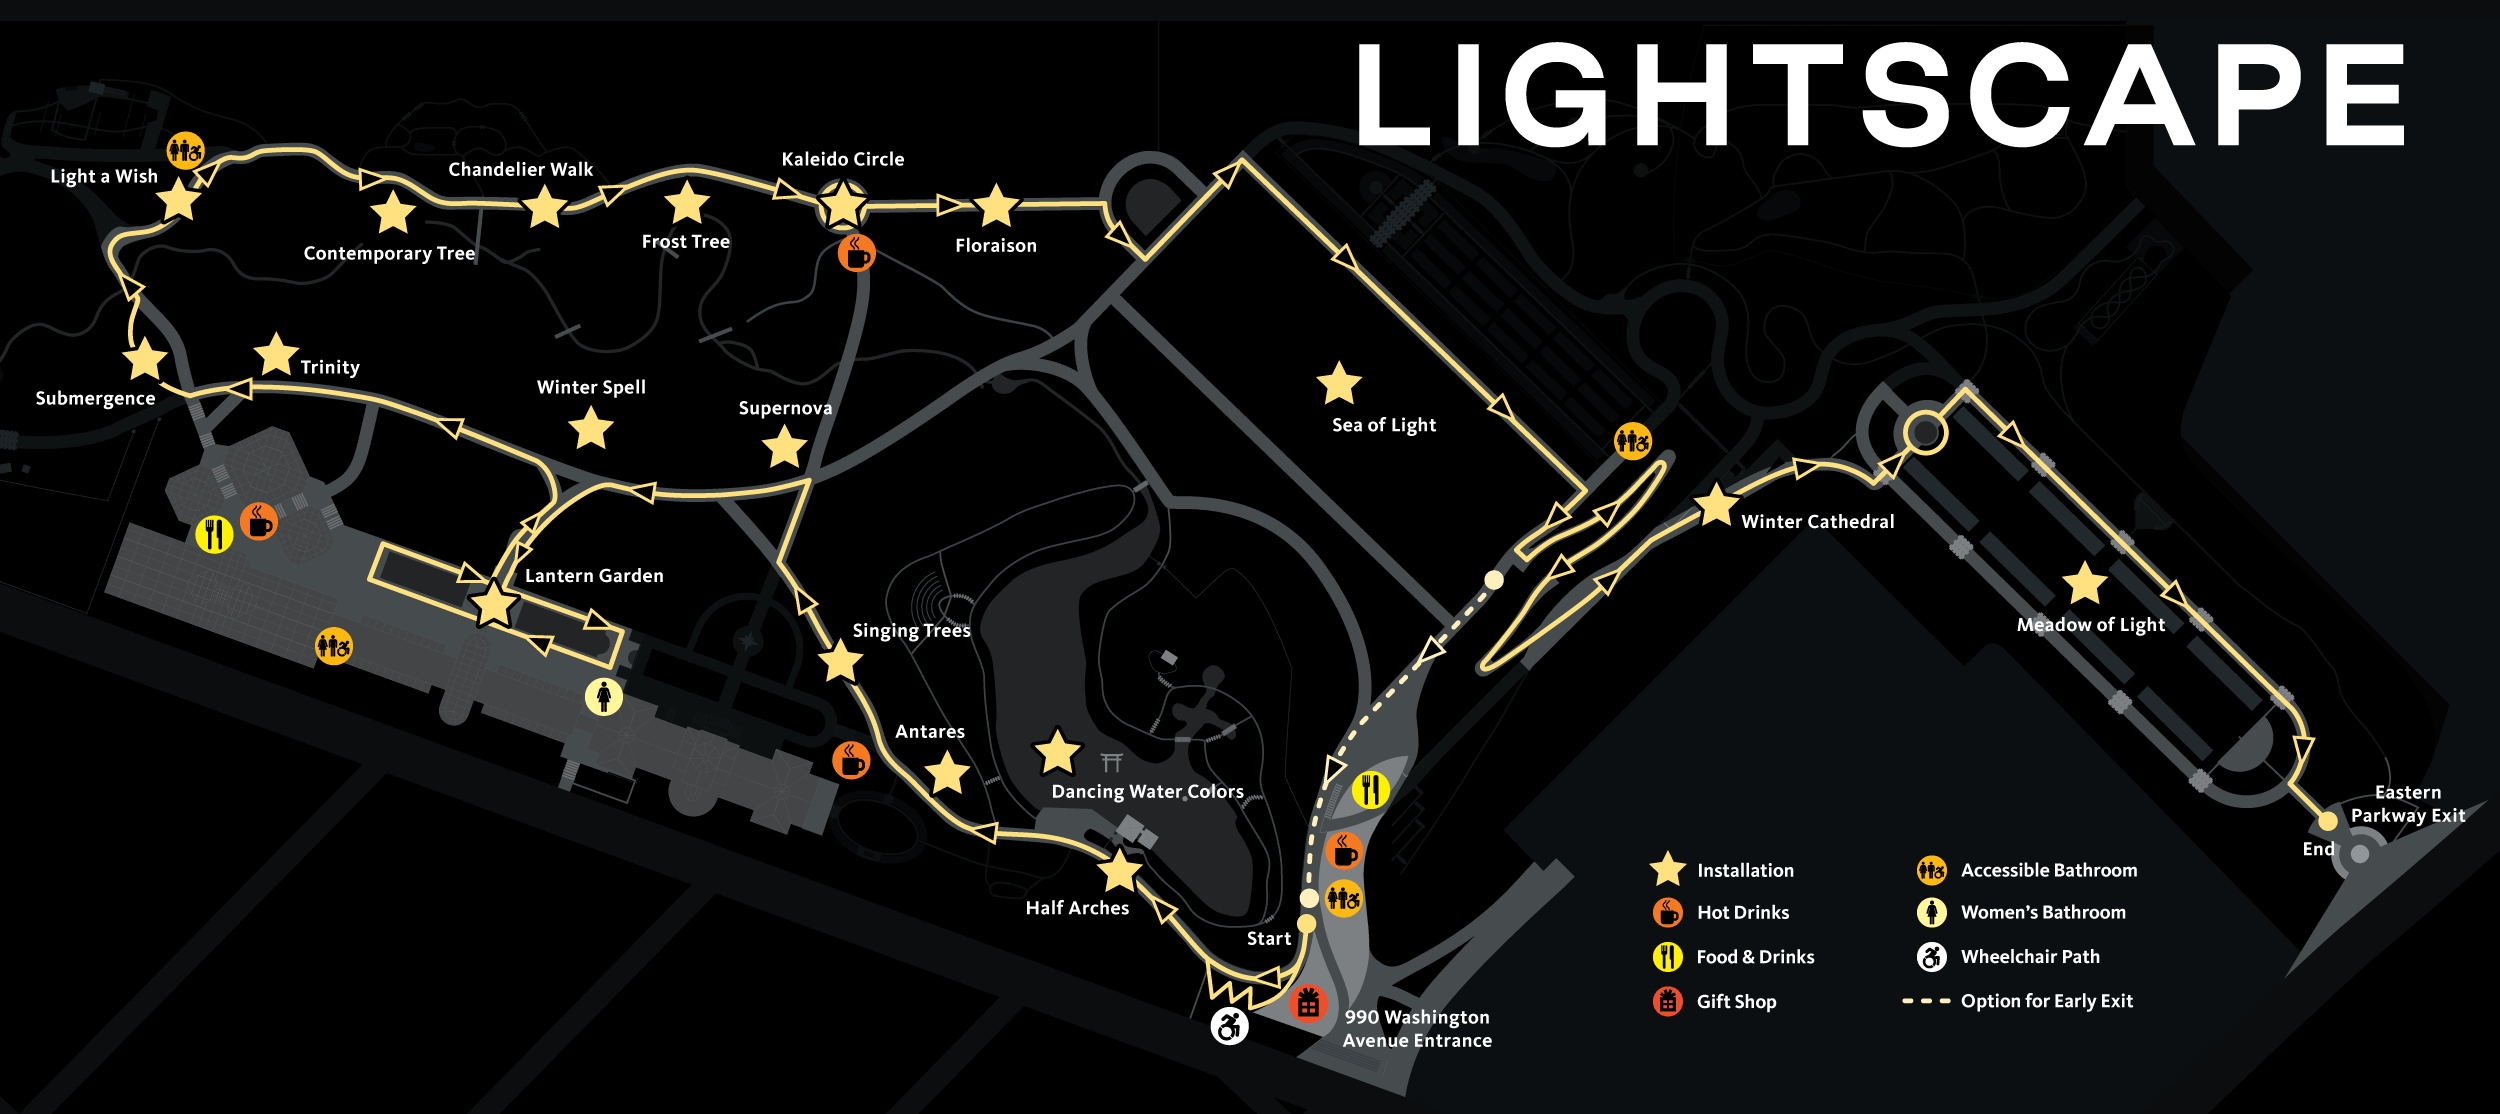 A yellow line indicates a route looping into the Garden from the Visitor Center. Along the route are stars and icons showing locations of installations, food & drink, and bathrooms.